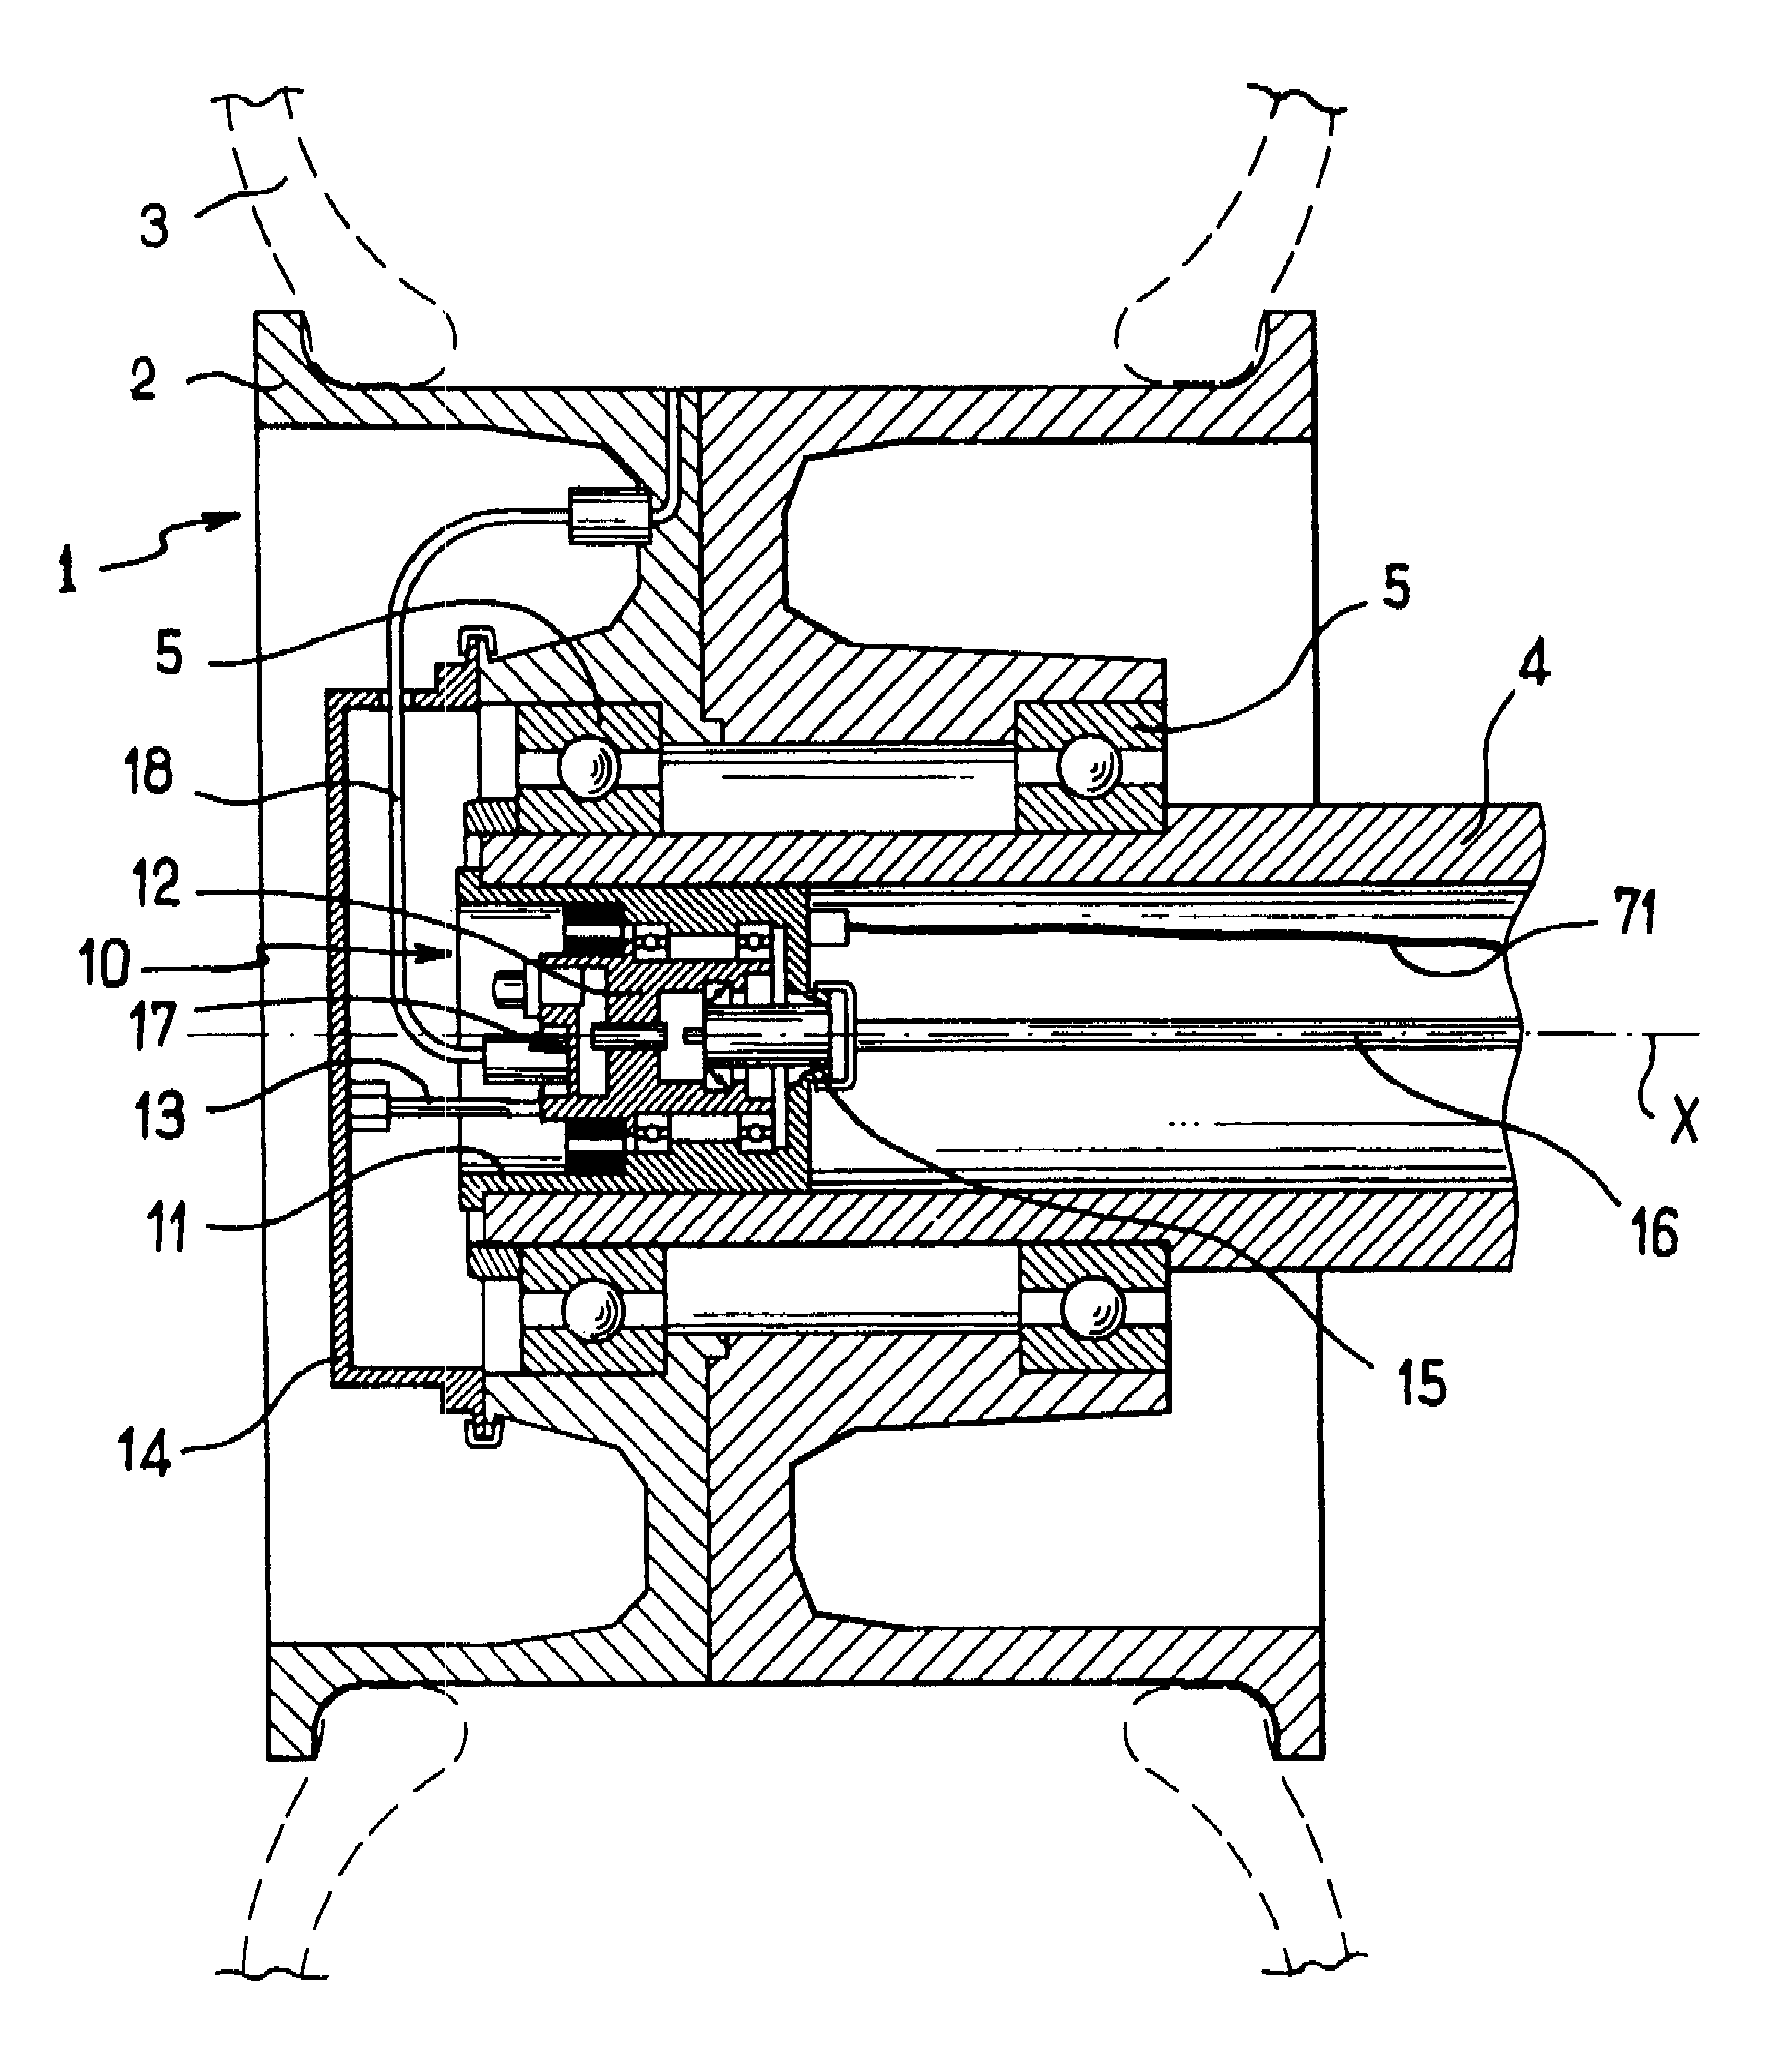 Device for connecting a tire of an aircraft wheel to a pneumatic unit of the aircraft